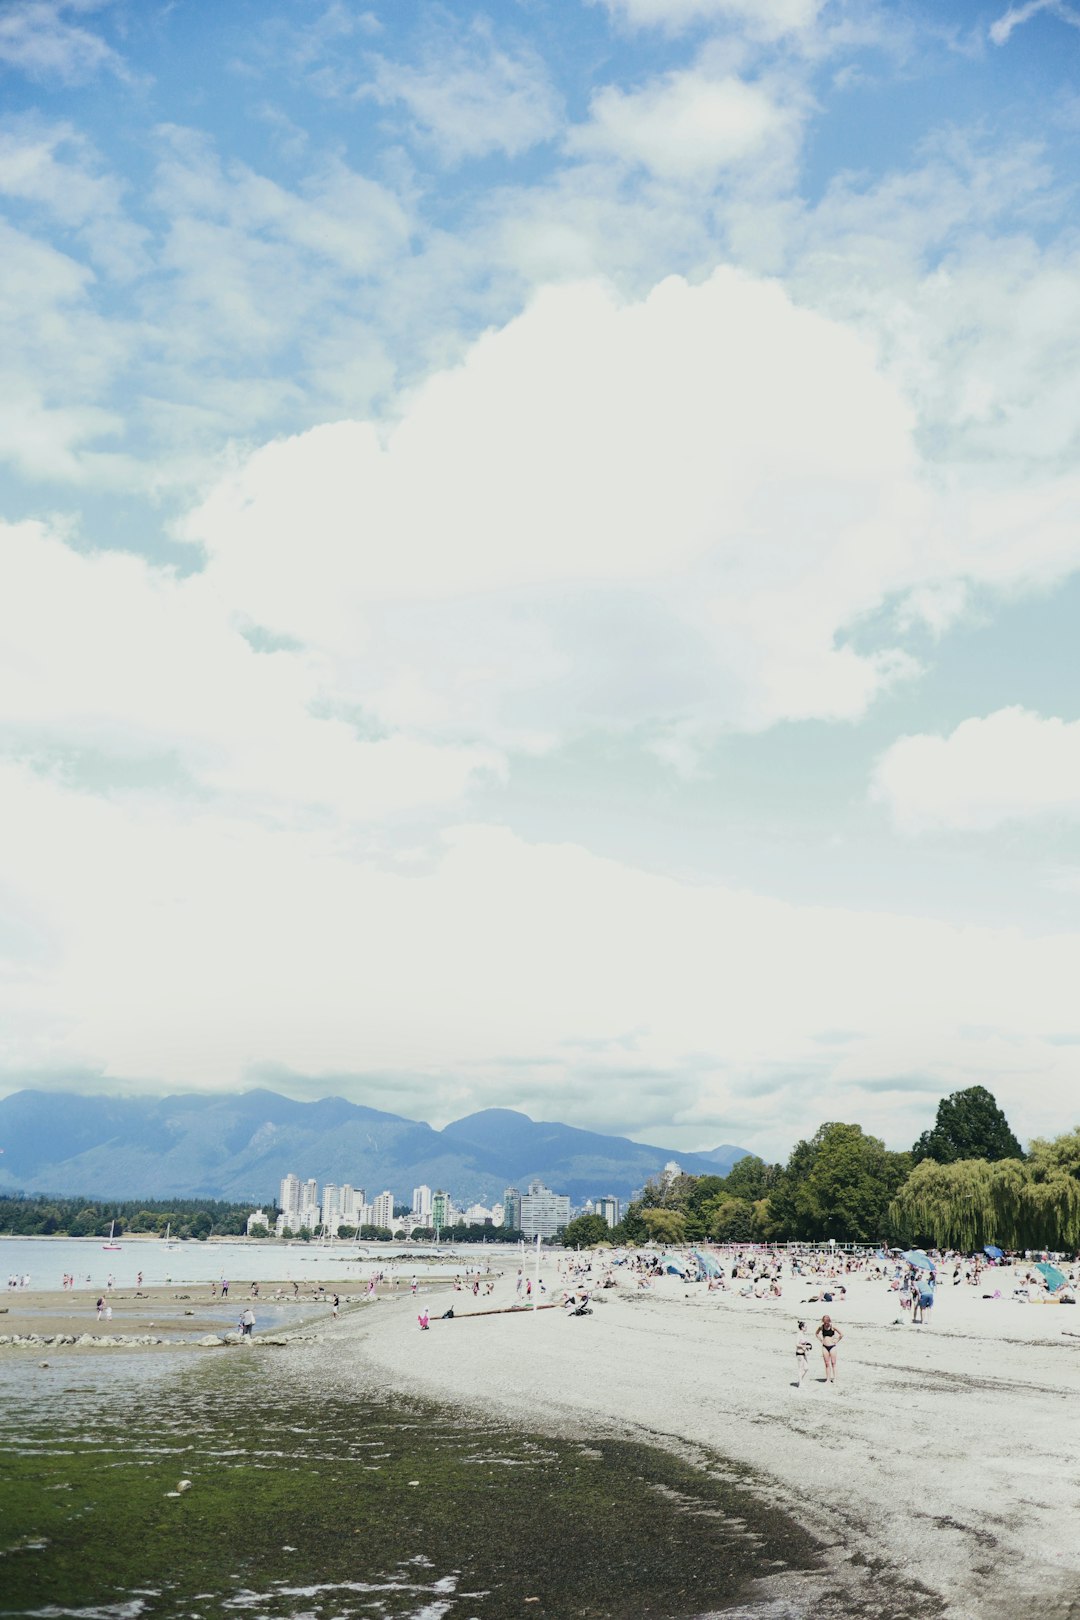 Travel Tips and Stories of Kitsilano Beach in Canada